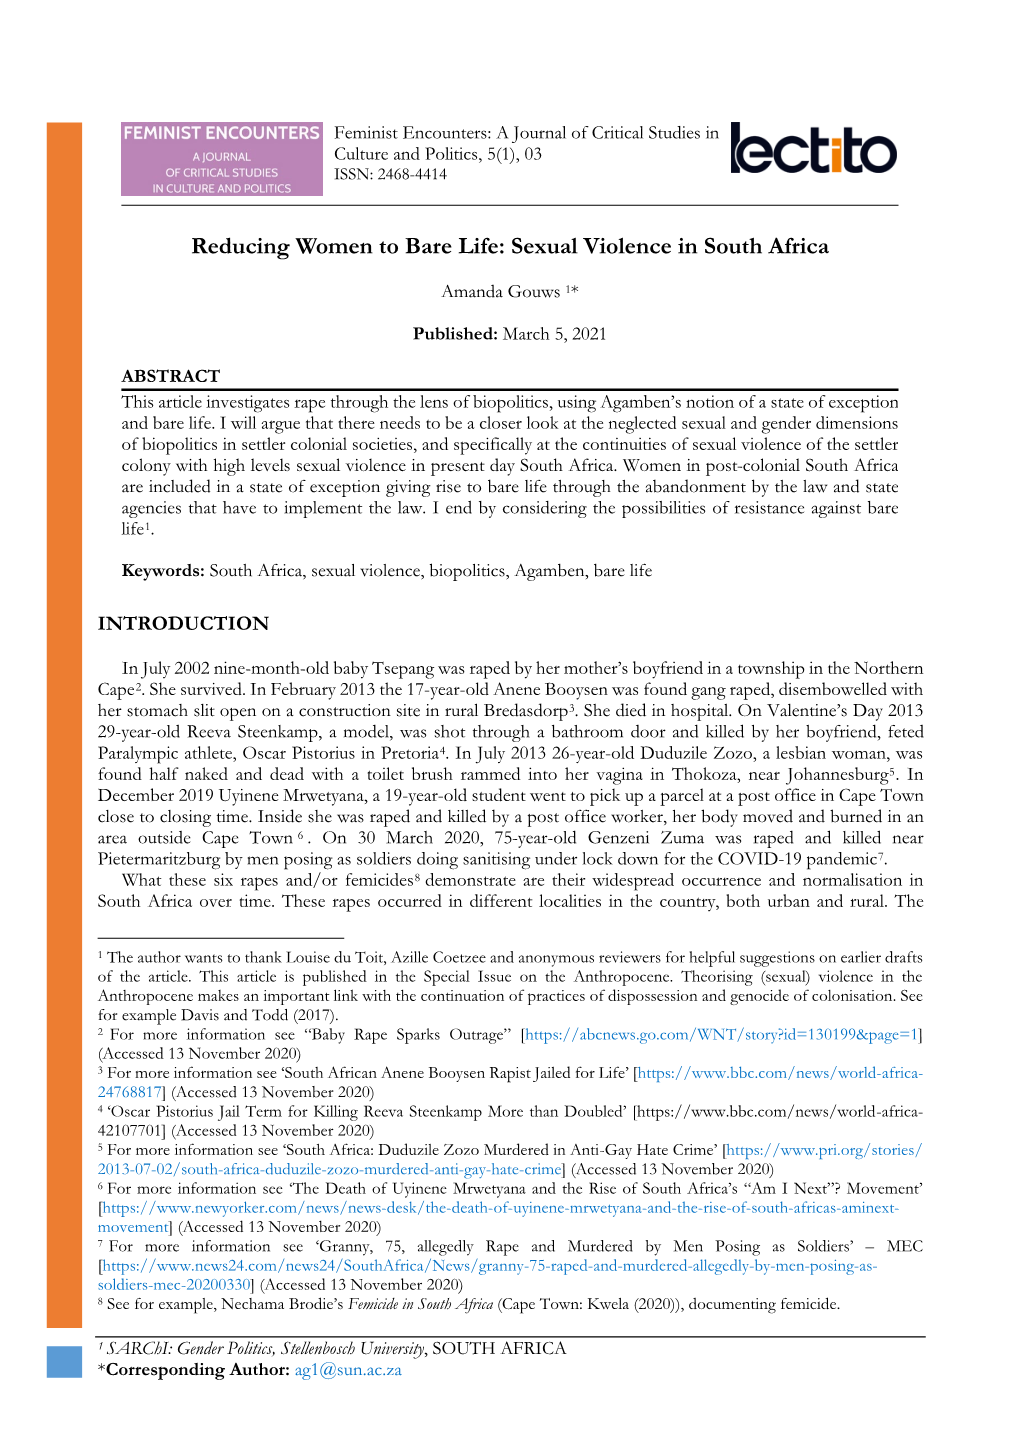 Sexual Violence in South Africa